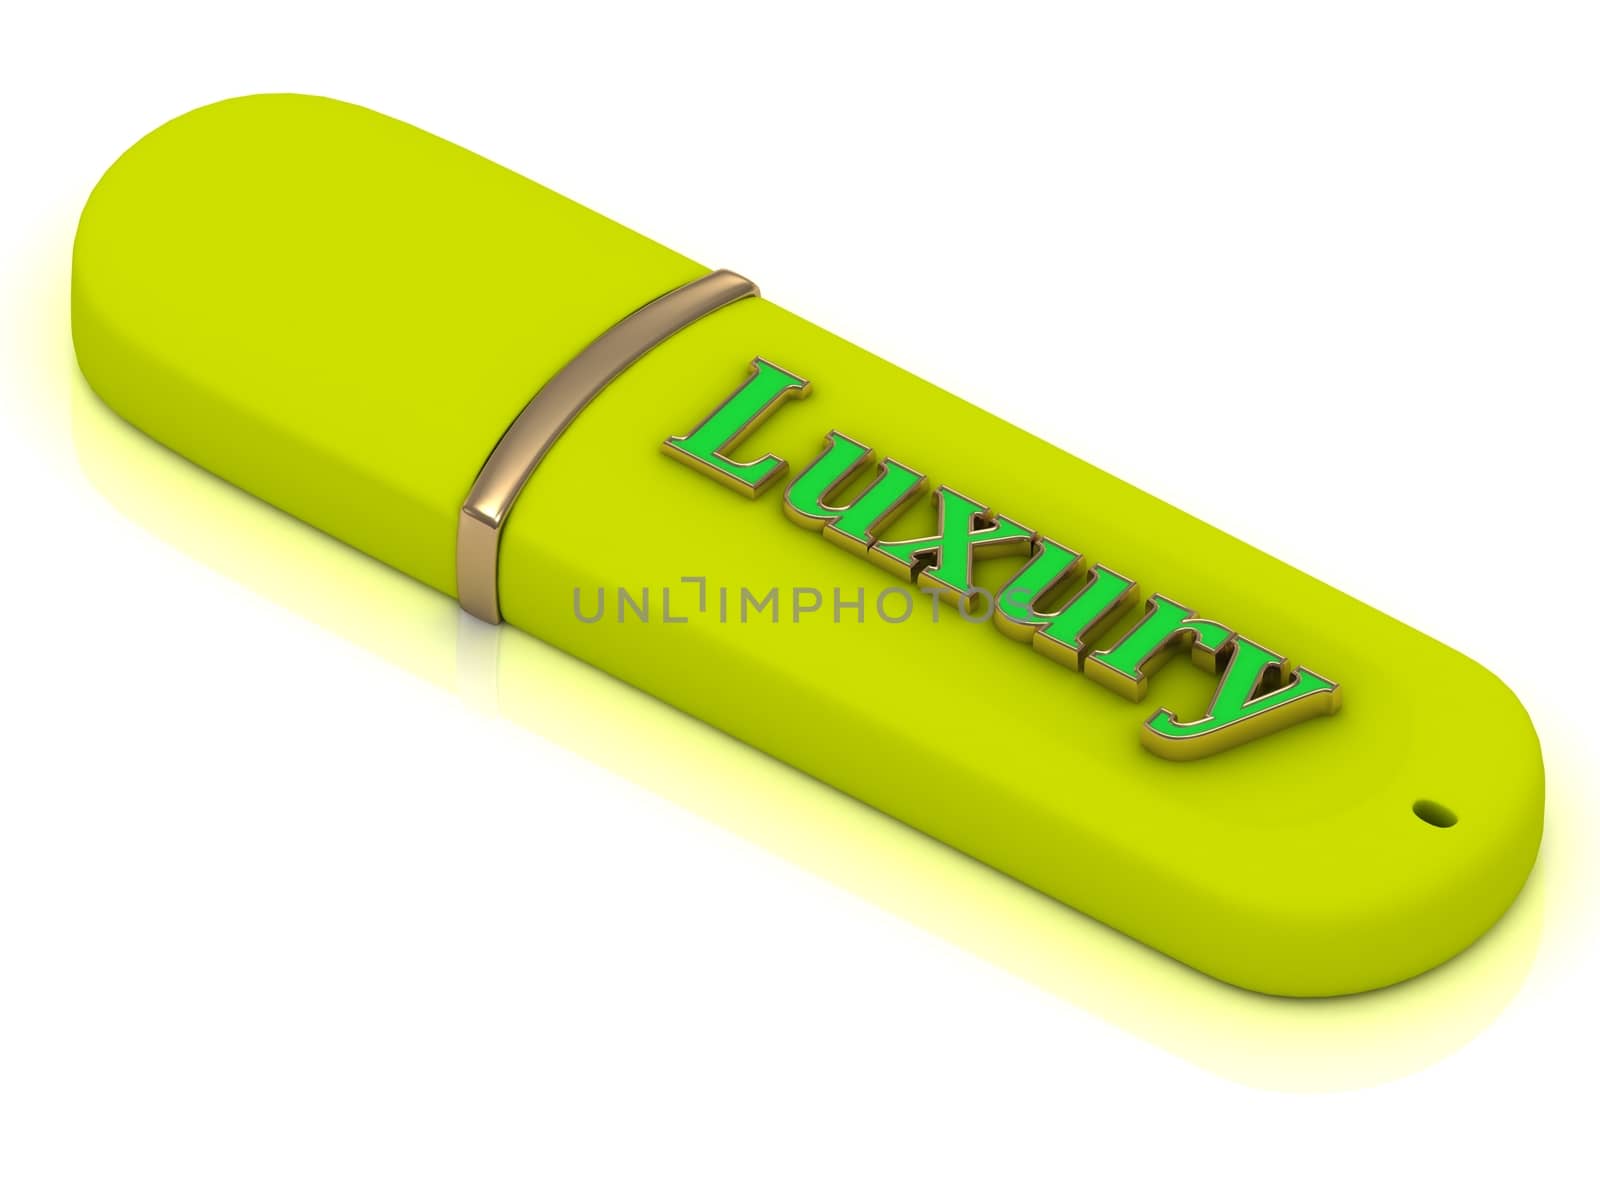 Luxury - inscription bright volume letter on yellow USB flash drive on white background